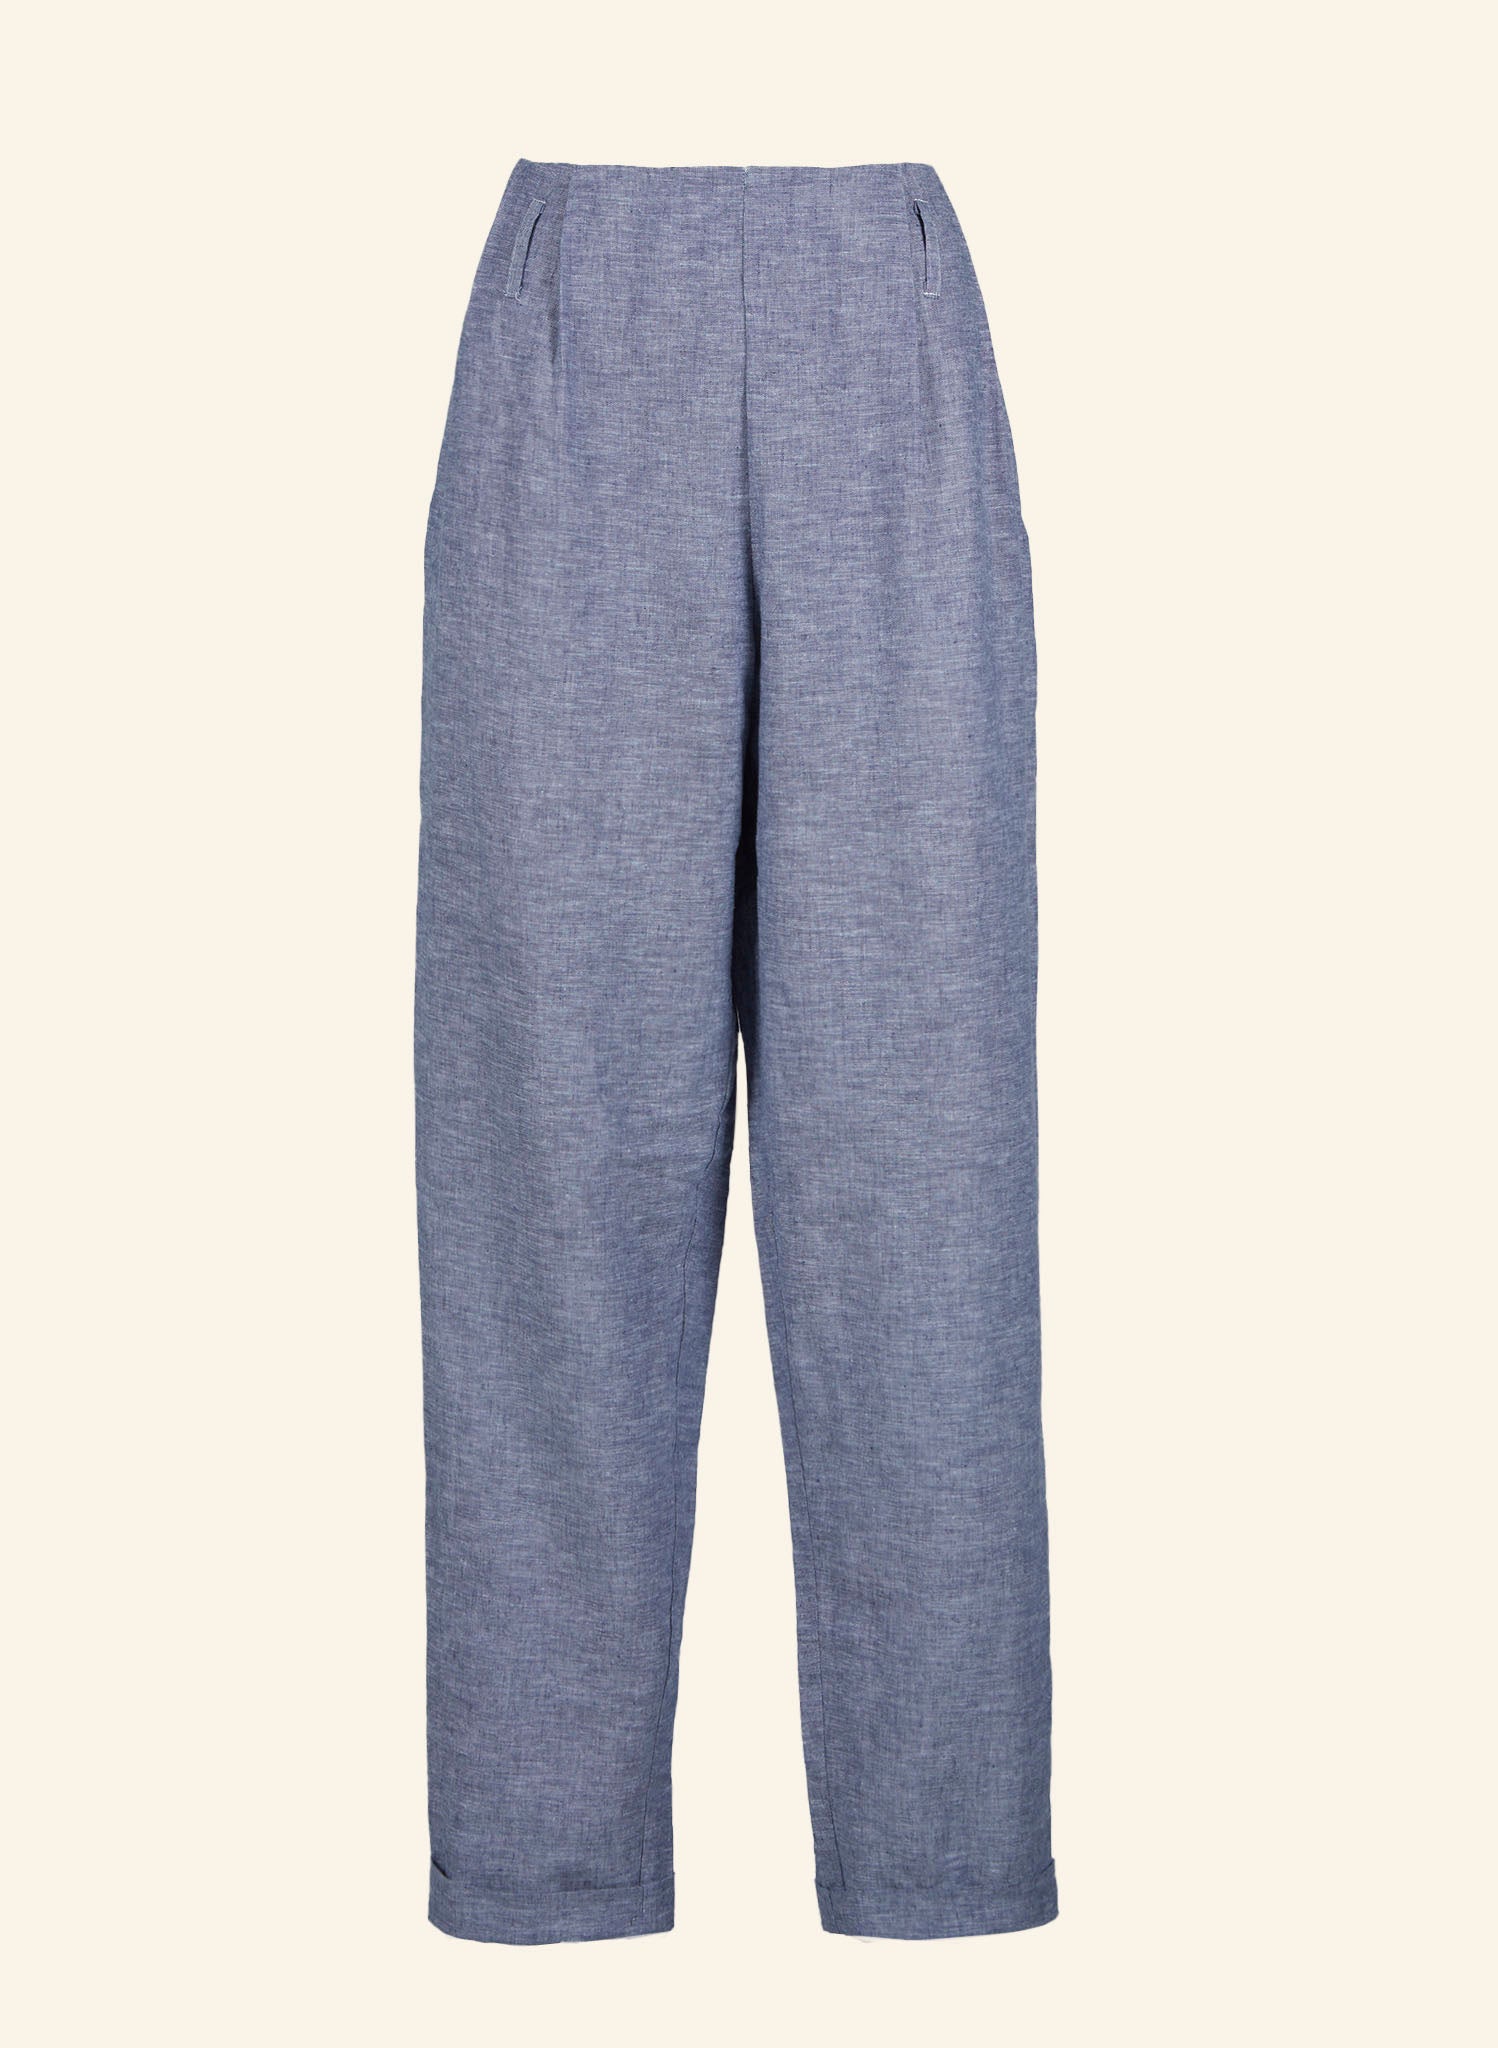 Wilma Trousers - Blue Marl